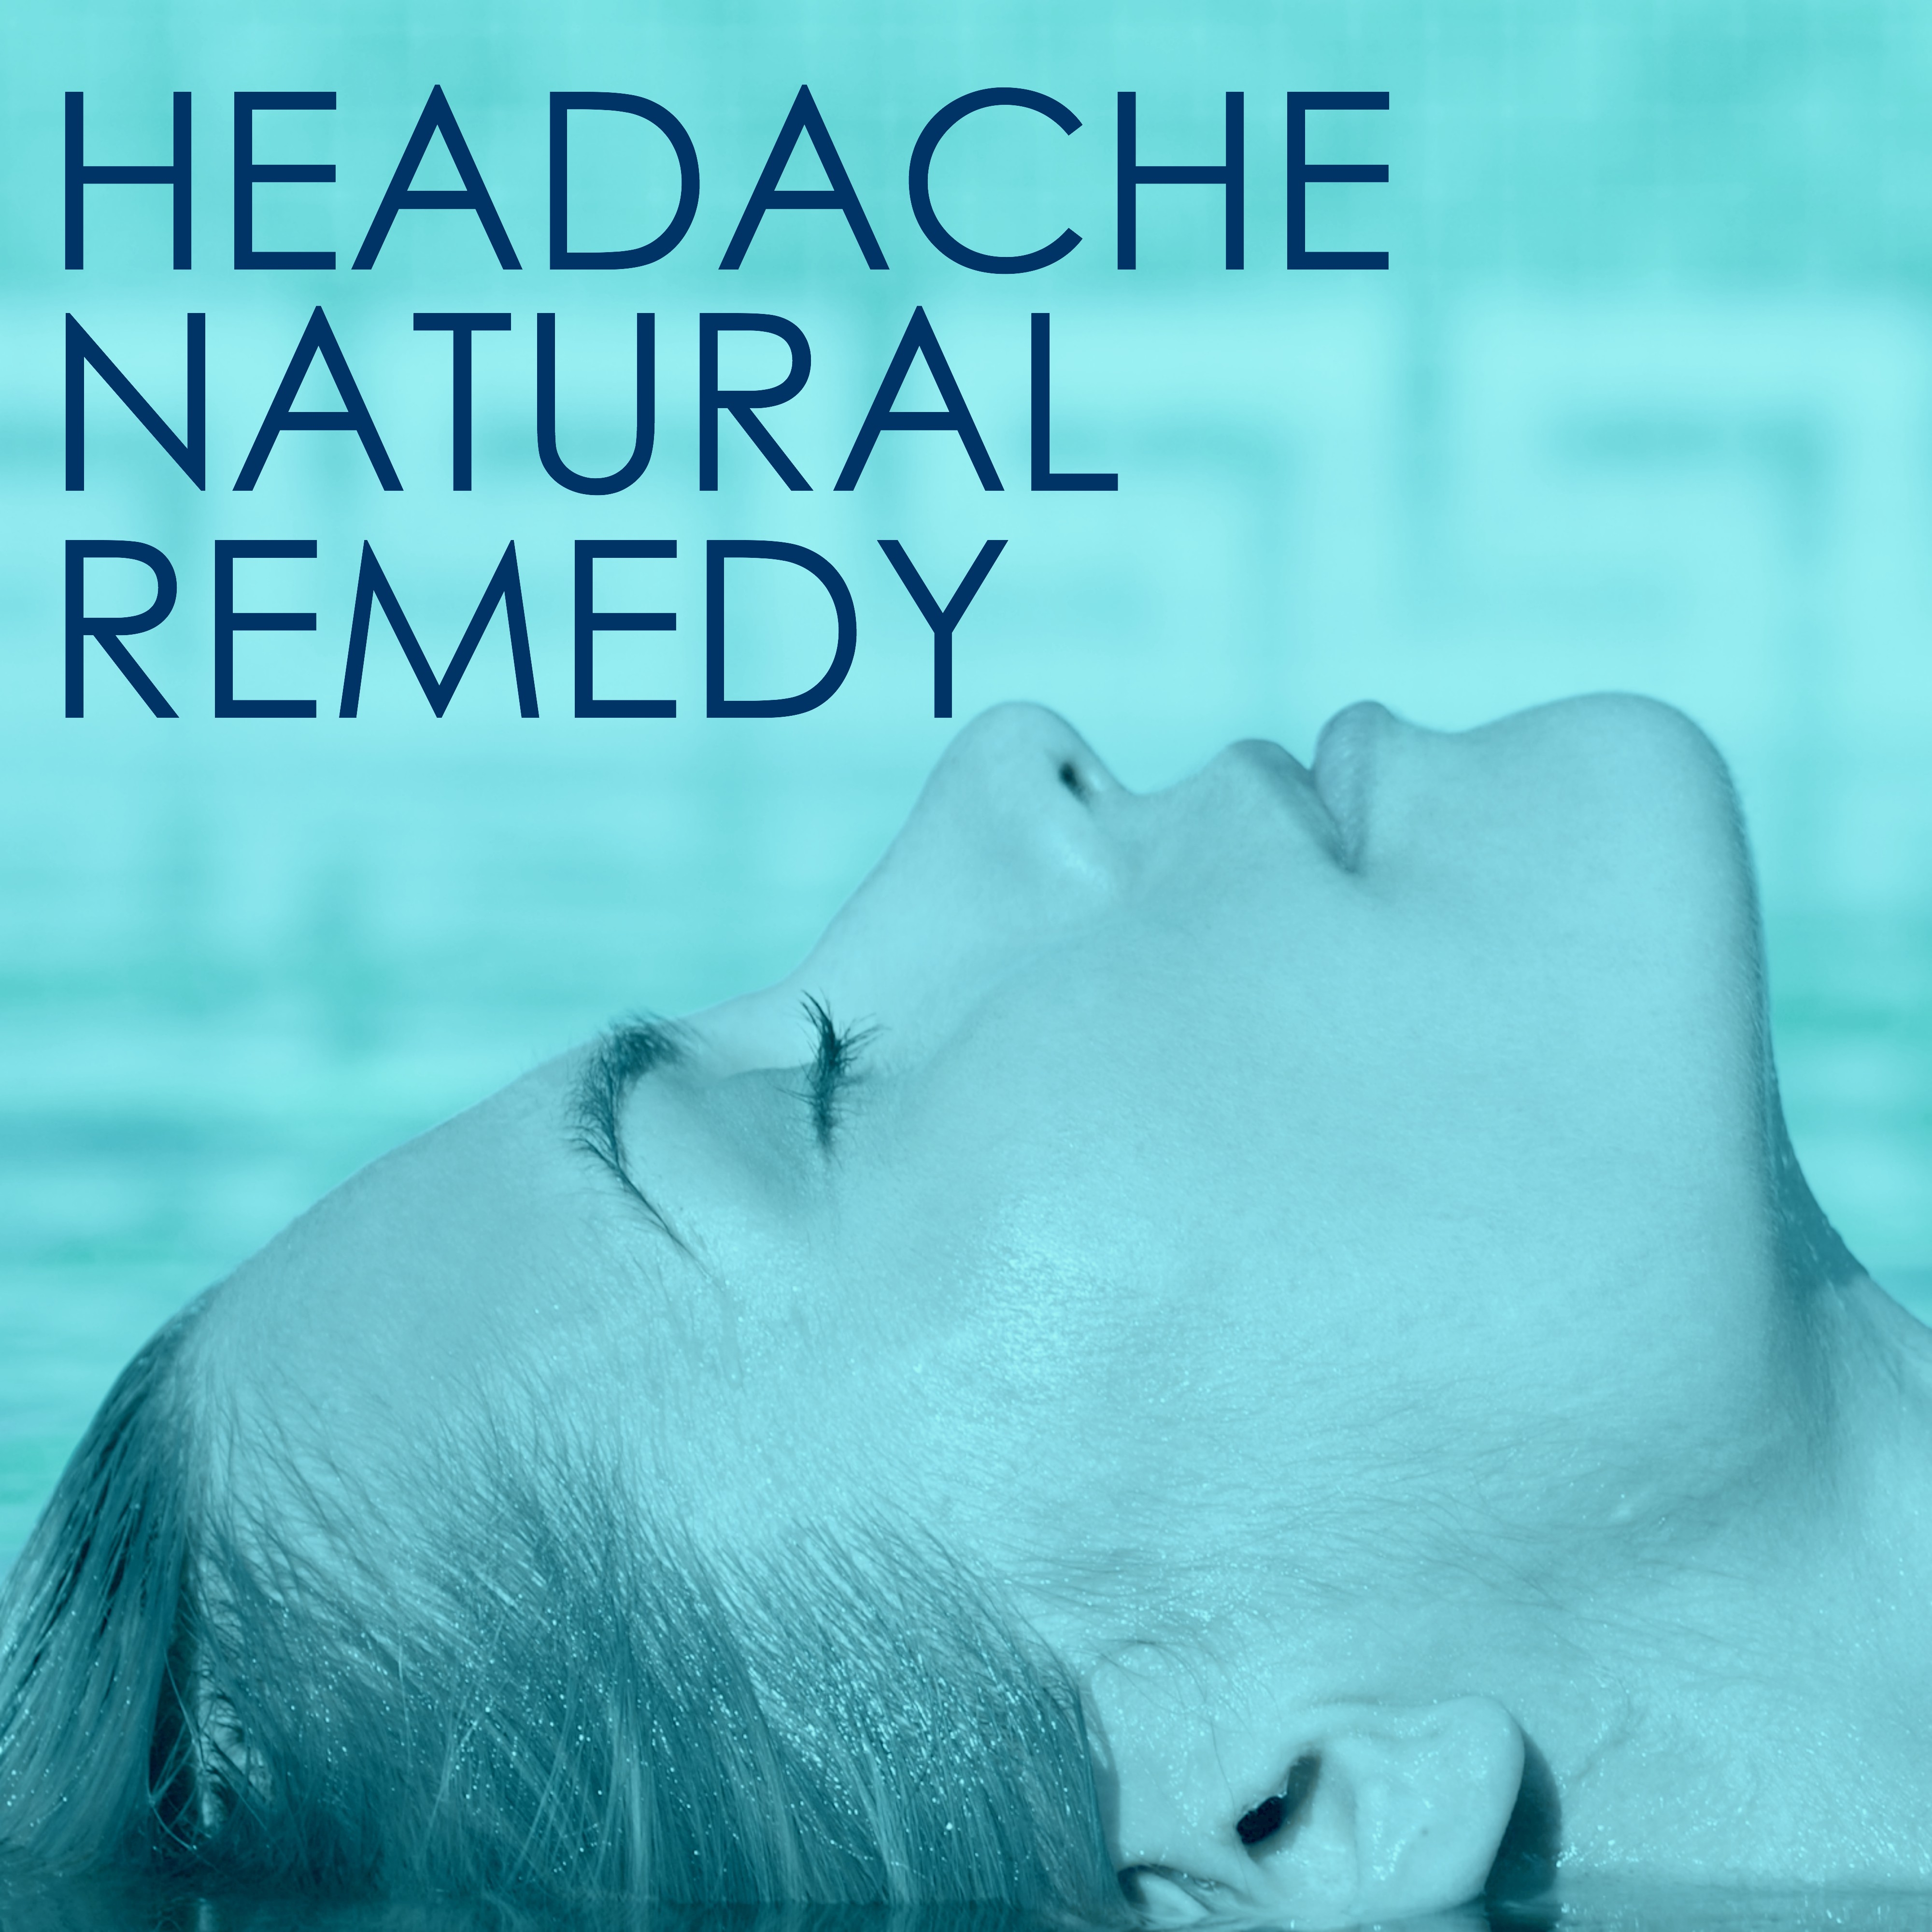 Headache Natural Remedy - Calming Melodies, Lullabies & Nature Sound for Deep Relaxation, Meditation & Autogenic Training for Headache and Tiredness Remedy